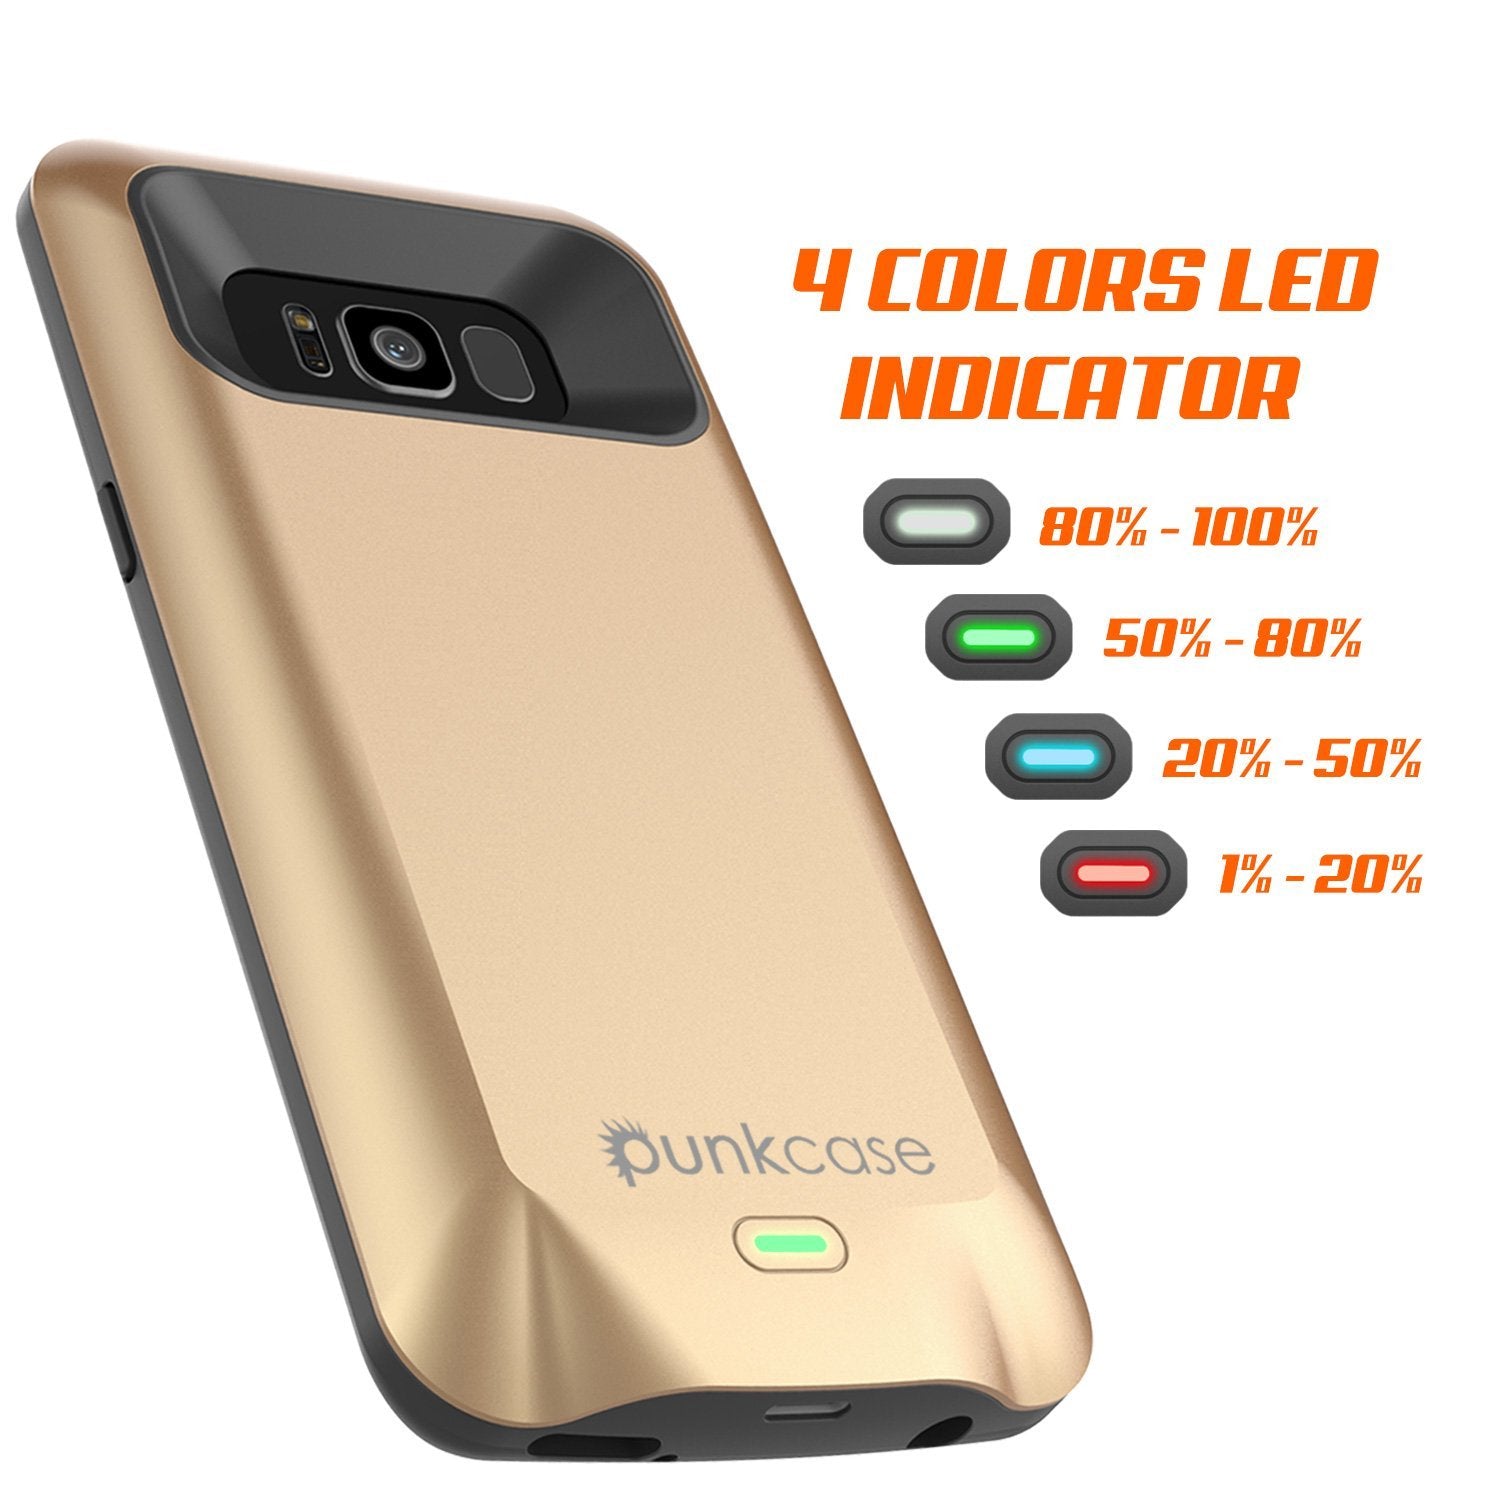 Galaxy S8 PLUS Battery Case, Punkcase 5500mAH Charger Case W/ Screen Protector | Integrated Kickstand & USB Port | IntelSwitch [Gold]